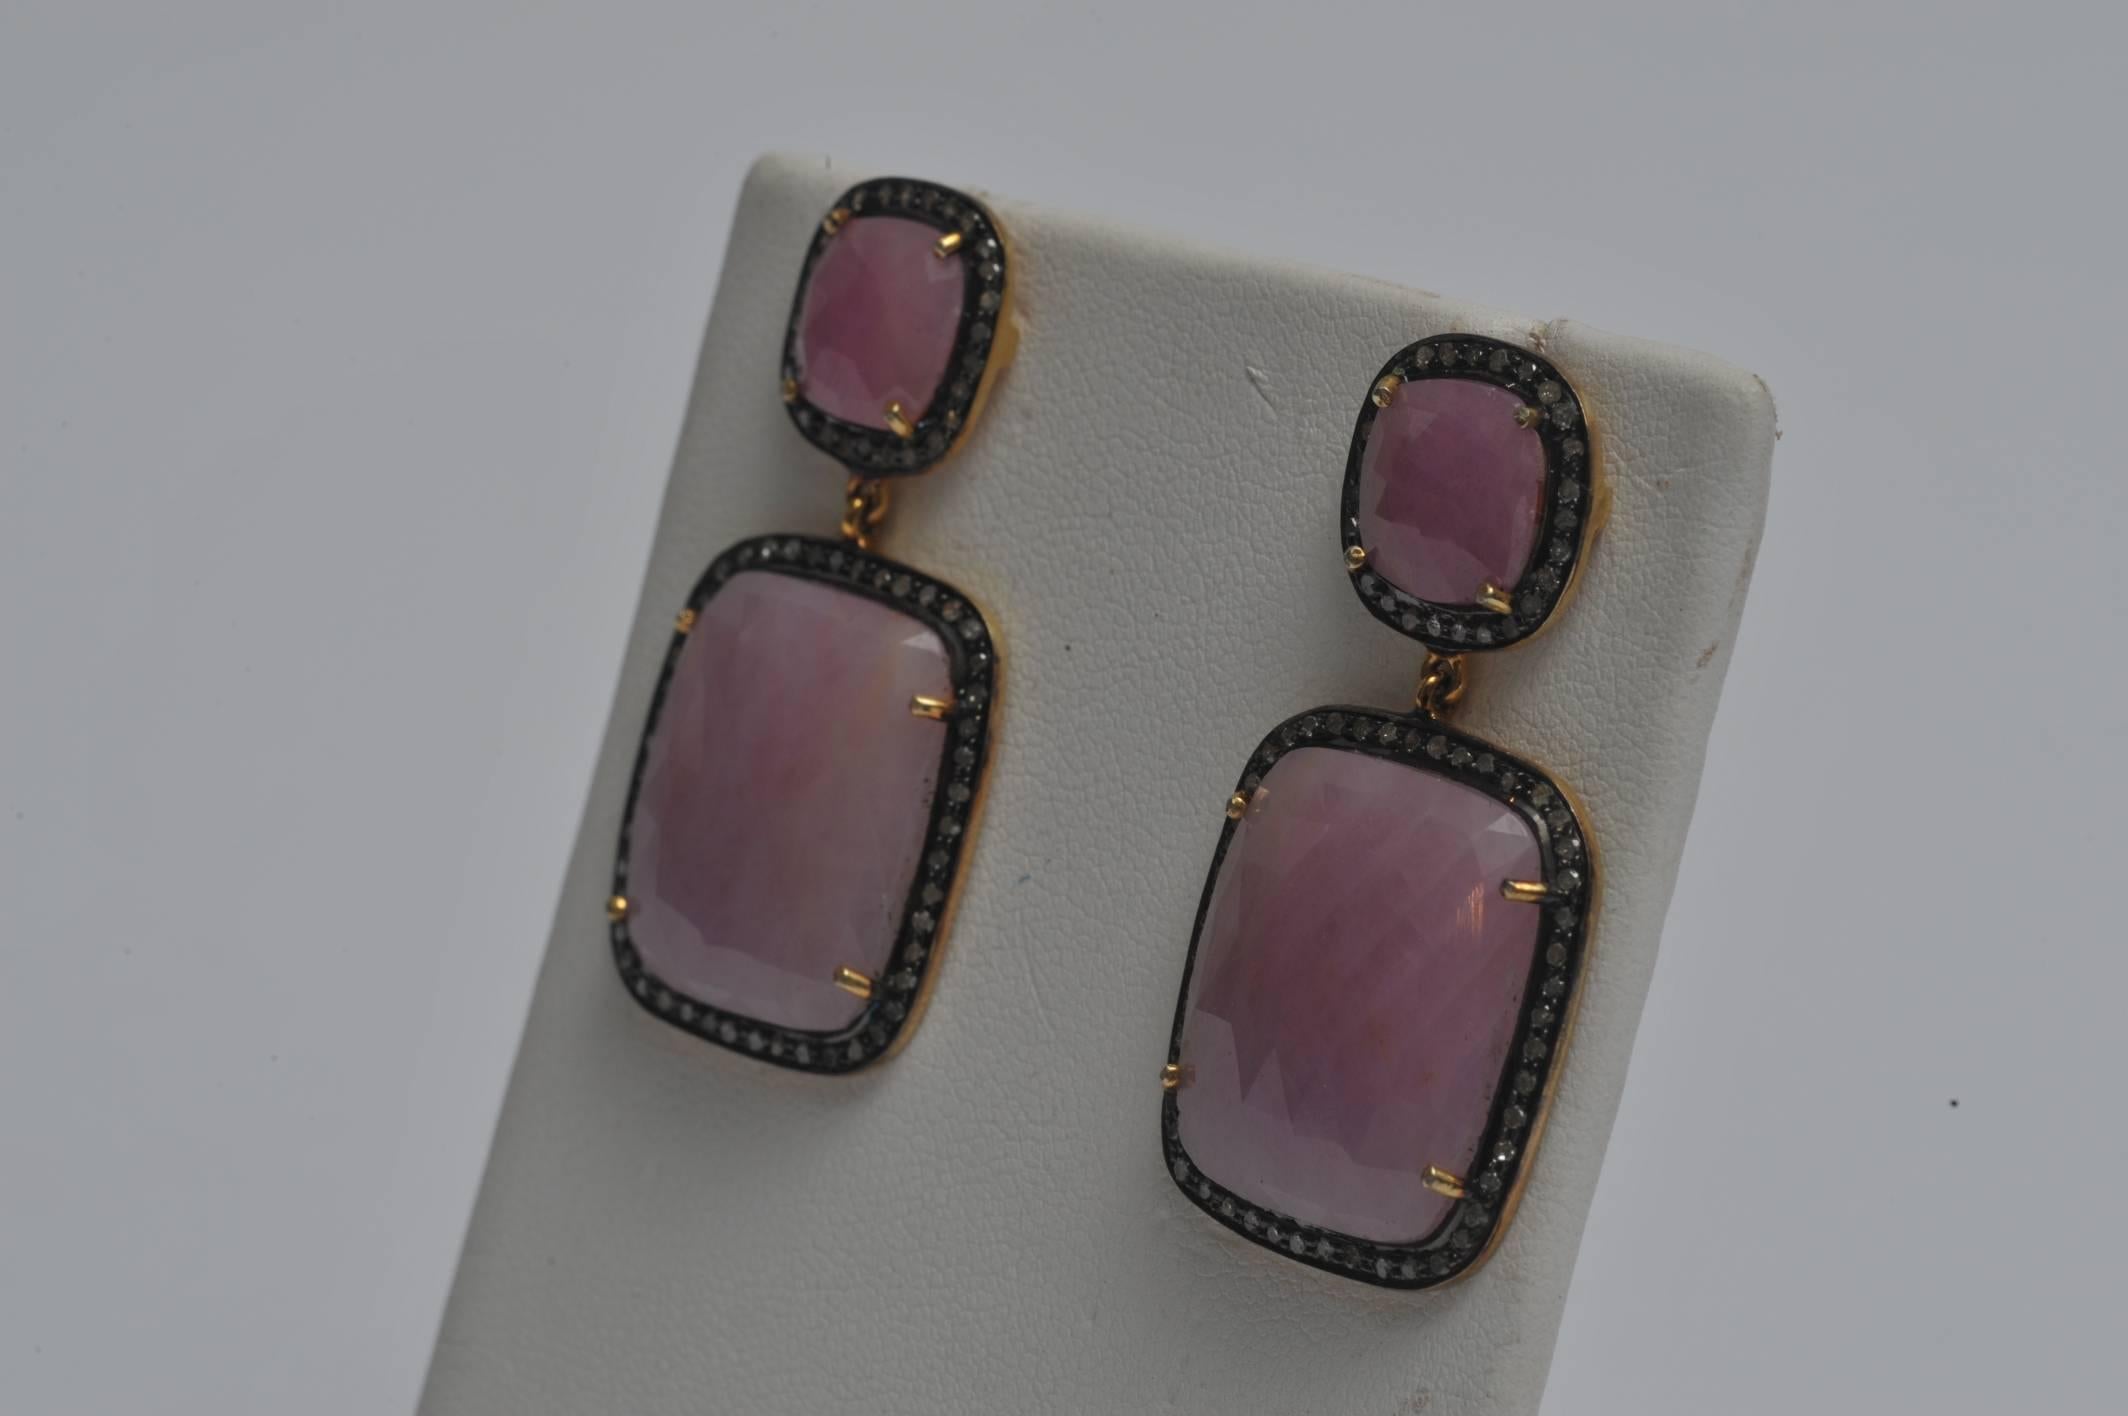 Unusual faceted pink sapphire slices bordered in pave`-set diamonds in oxidized sterling silver.  The posts are 18K gold for pierced ears.  Carat weight of pink sapphires is 43.13; carat weight of diamonds is .96.  The top portion of the earring